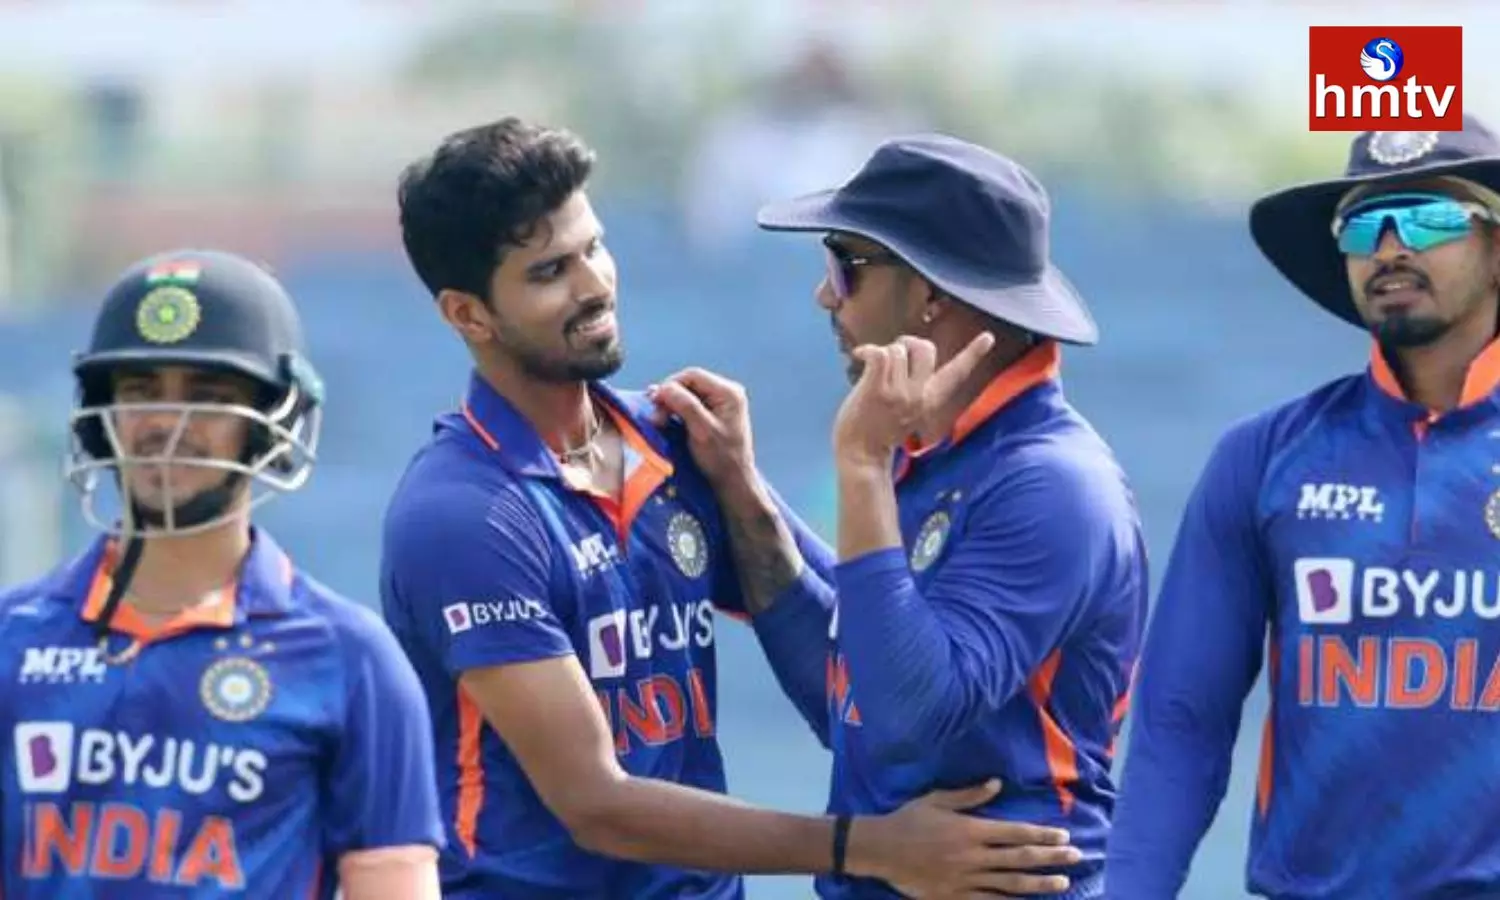 Team India win by 7 wickets | Sports News